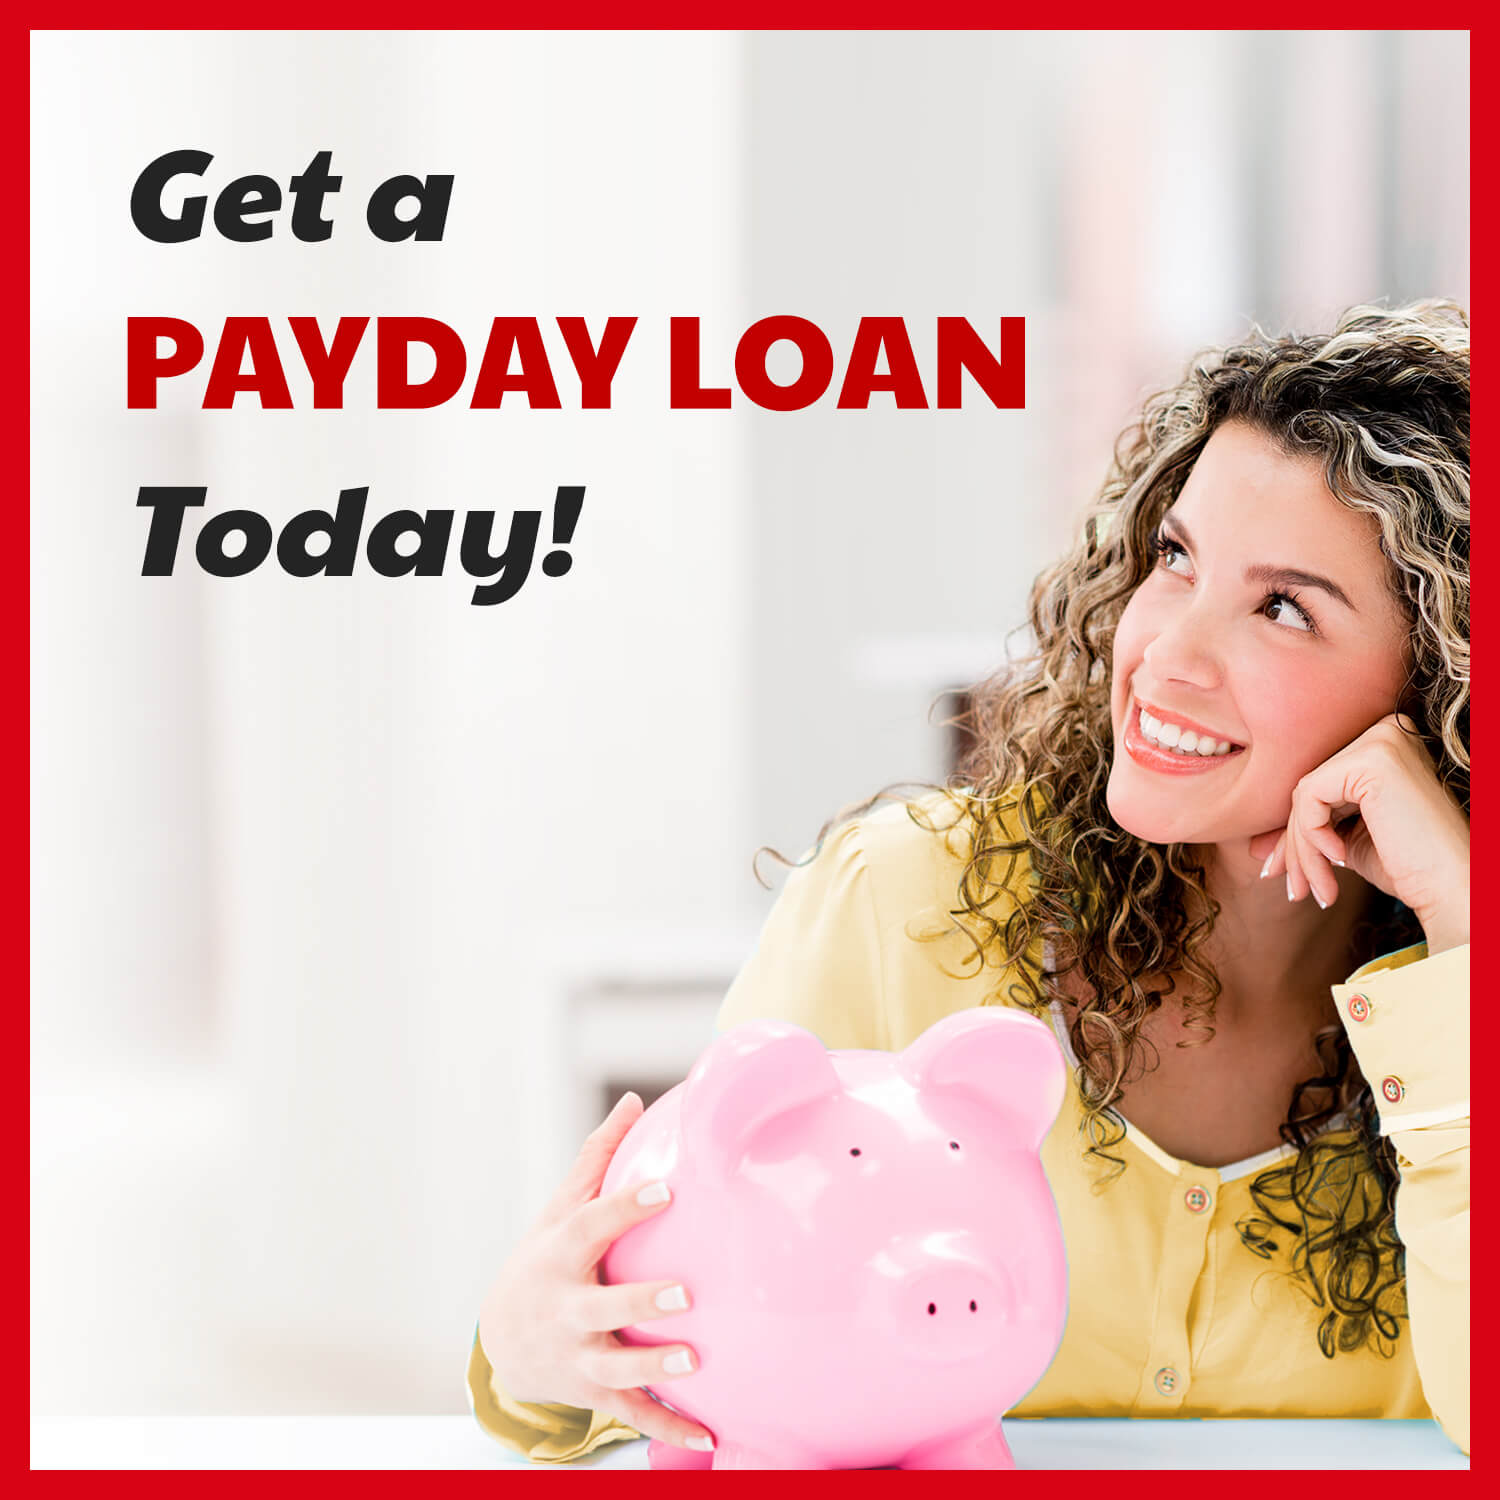 qualify for a payday loan today